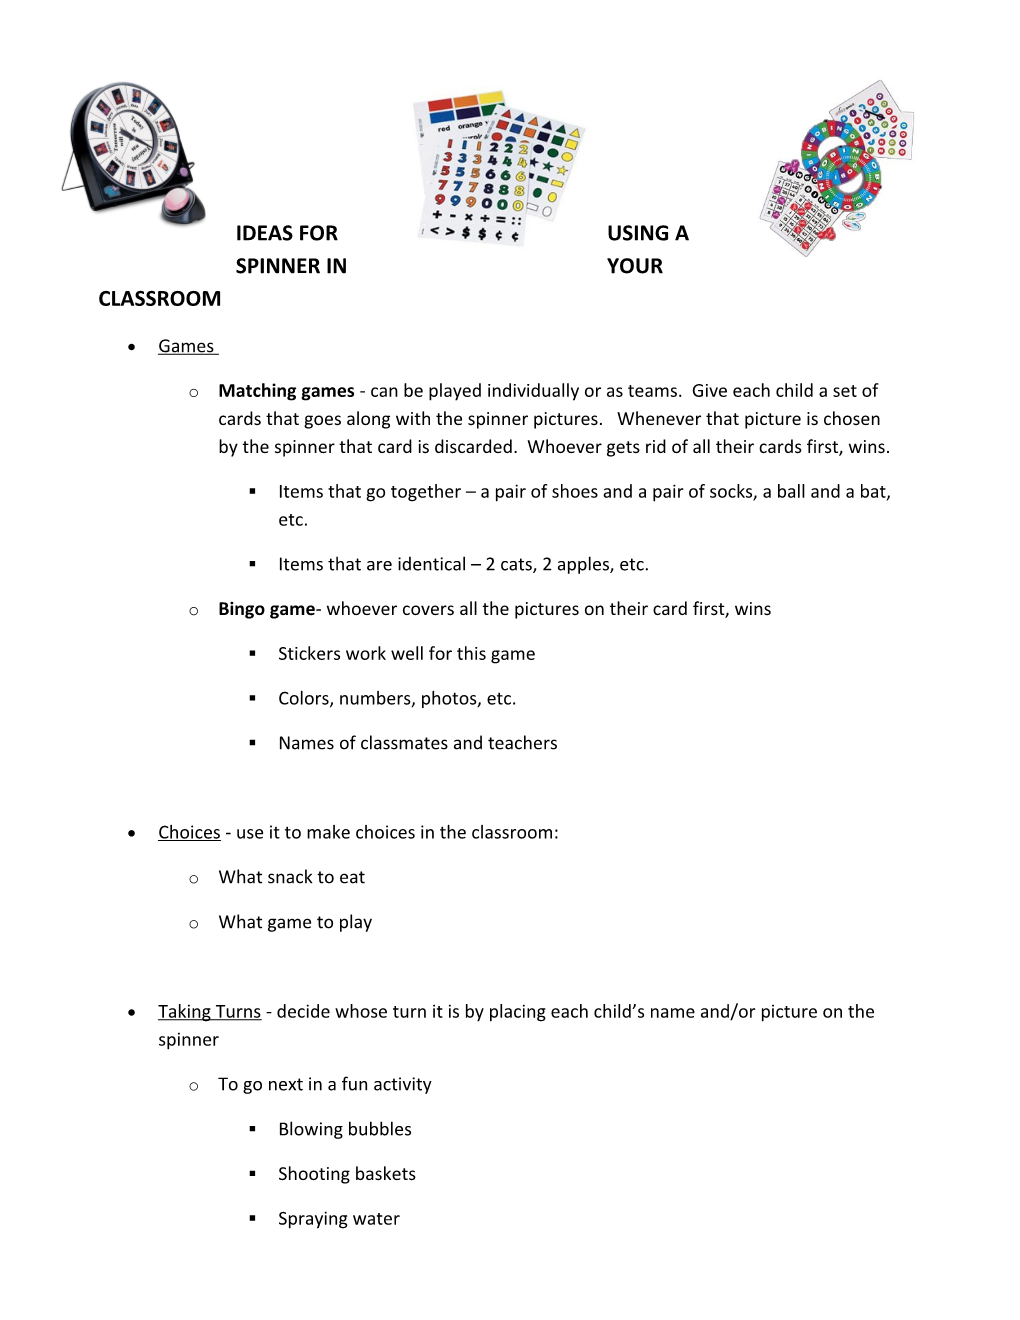 Ideas for Using a Spinner in Your Classroom